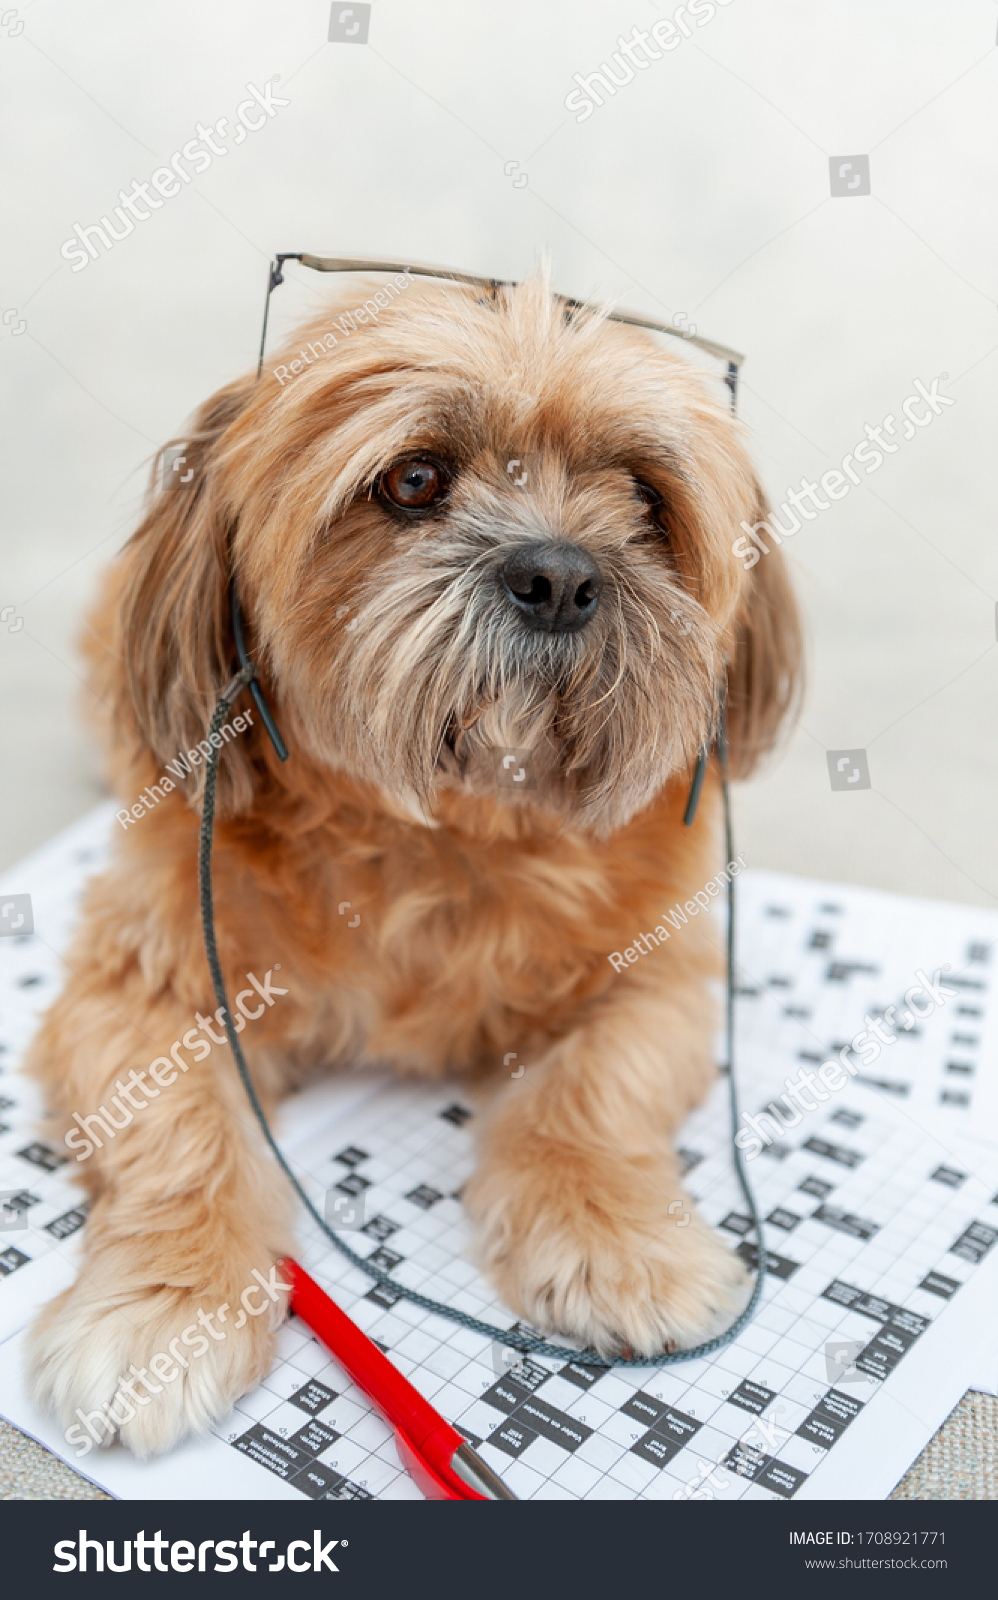 Small Dog Doing Crossword Puzzle Stock Photo 1708921771 Shutterstock